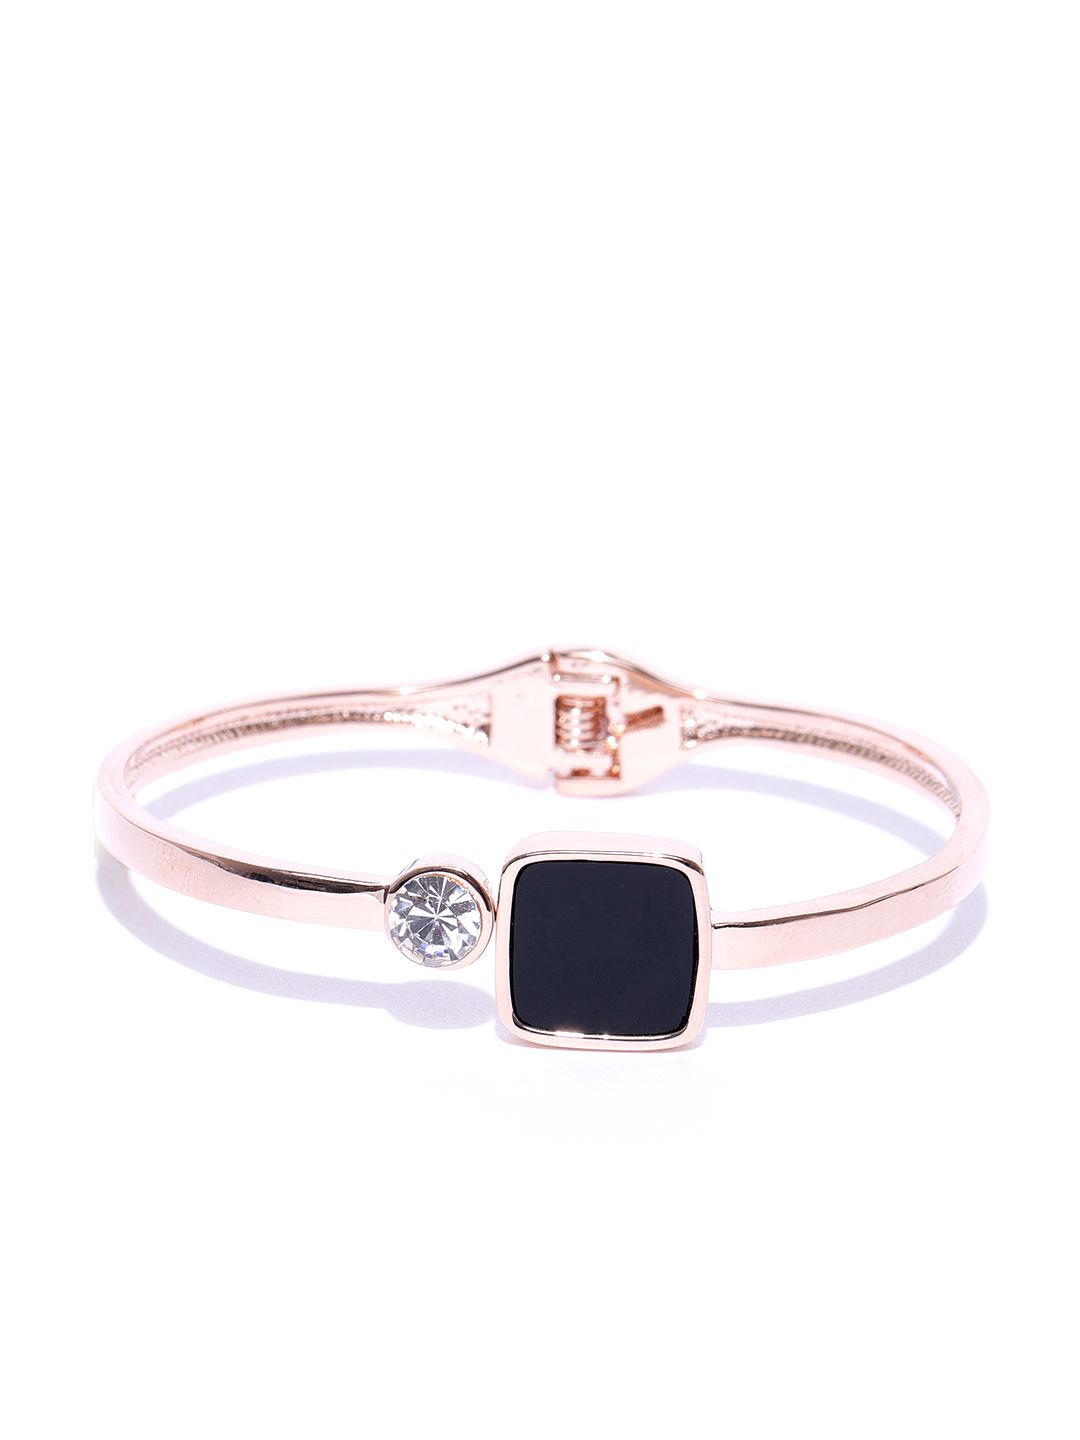 Jewels Galaxy Black Rose Gold-Plated Handcrafted Stone-Studded Cuff Bracelet Price in India